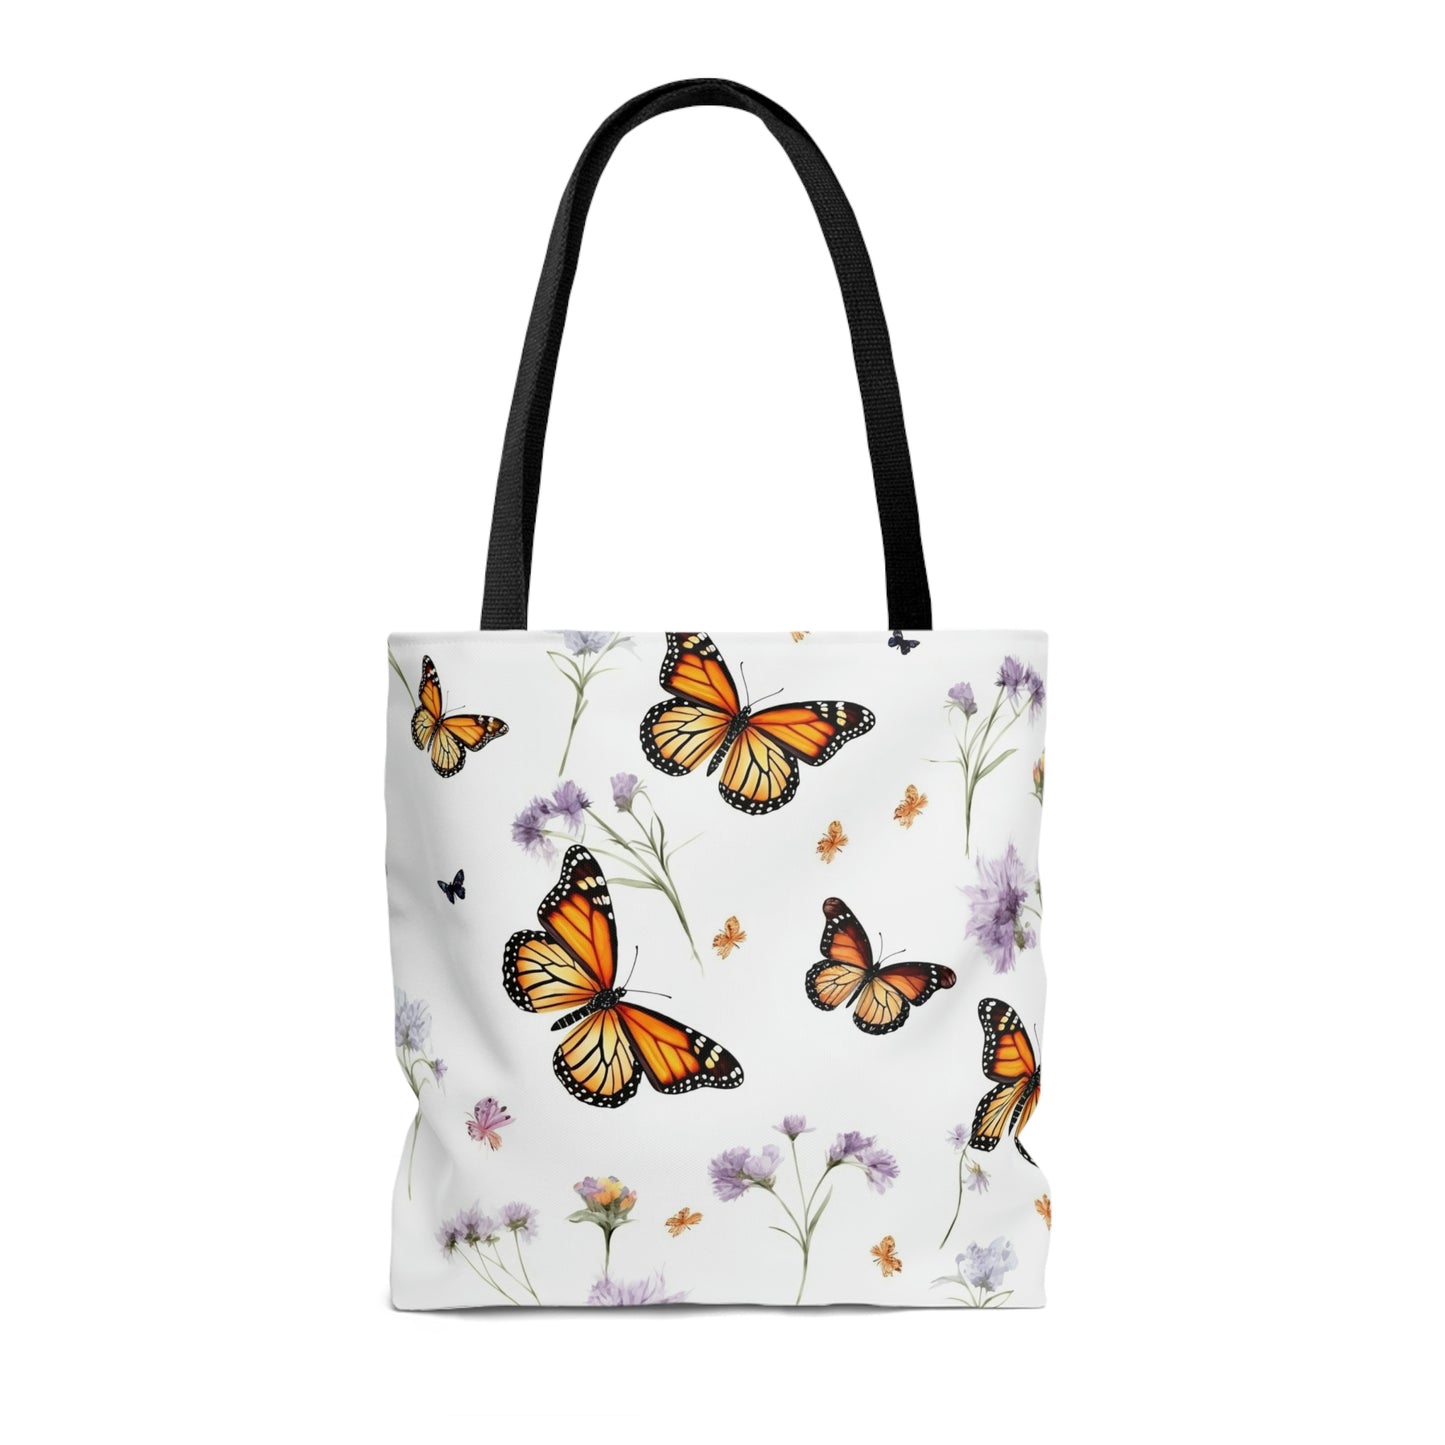 Monarch Butterfly Tote Bag, Purple Flowers Floral Cute Canvas Shopping Small Large Travel Reusable Aesthetic Shoulder Bag Starcove Fashion